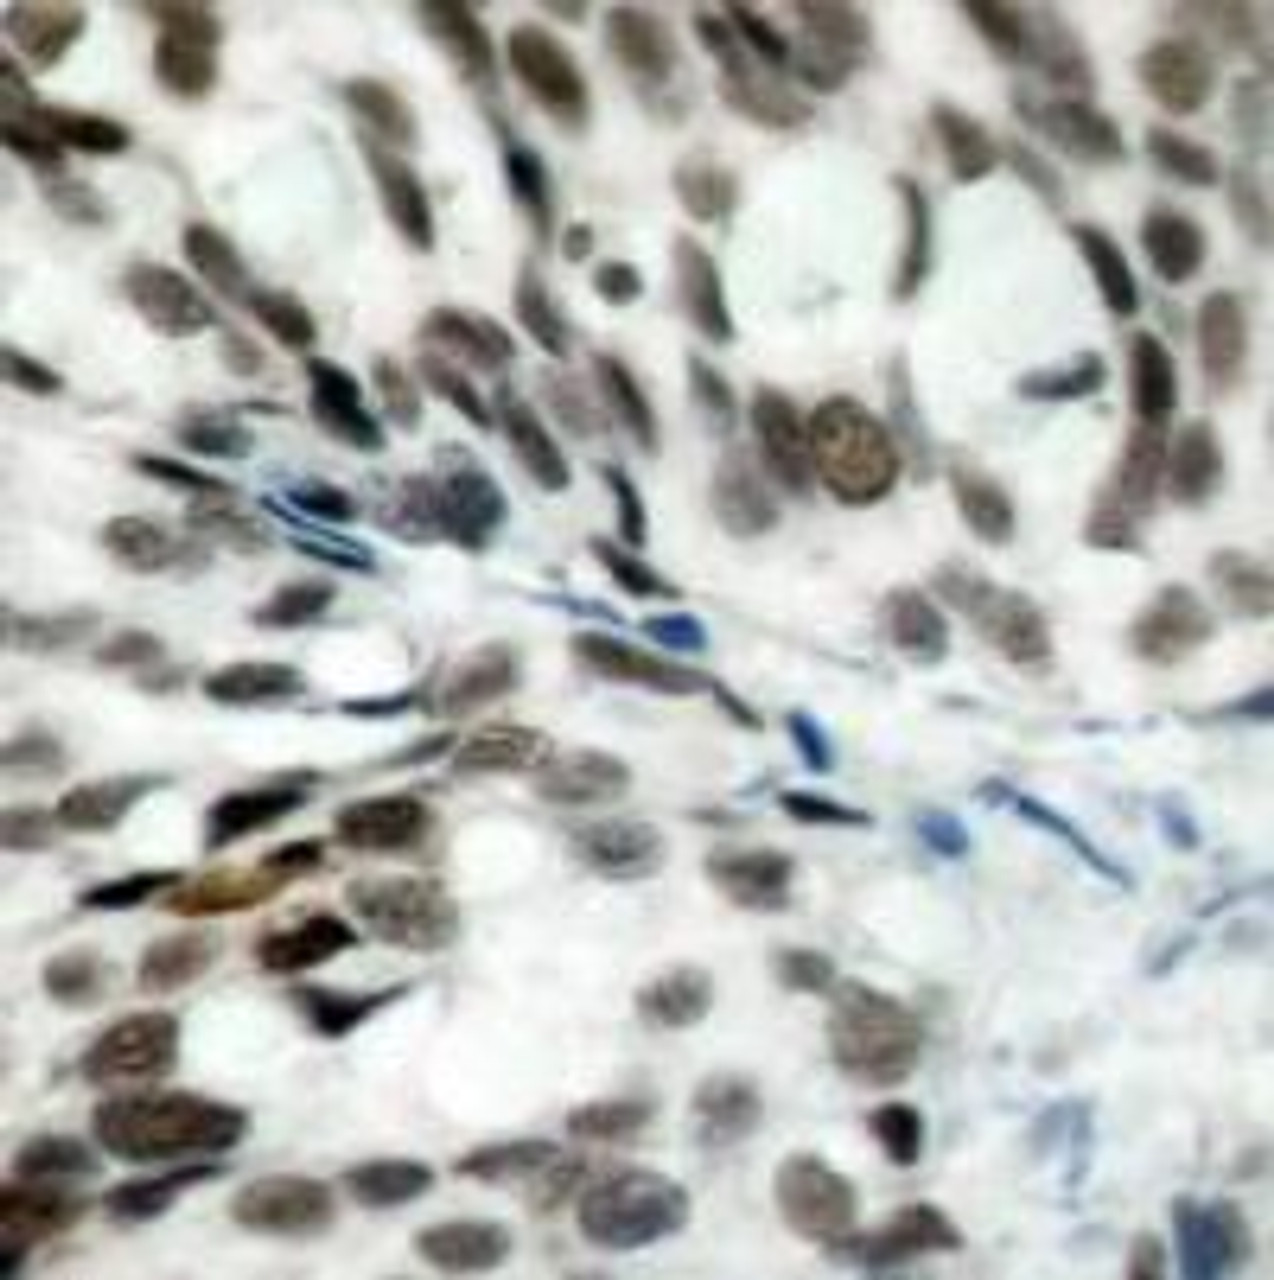 Immunohistochemical analysis of paraffin-embedded human breast carcinoma tissue using Rb (Ab-780) .